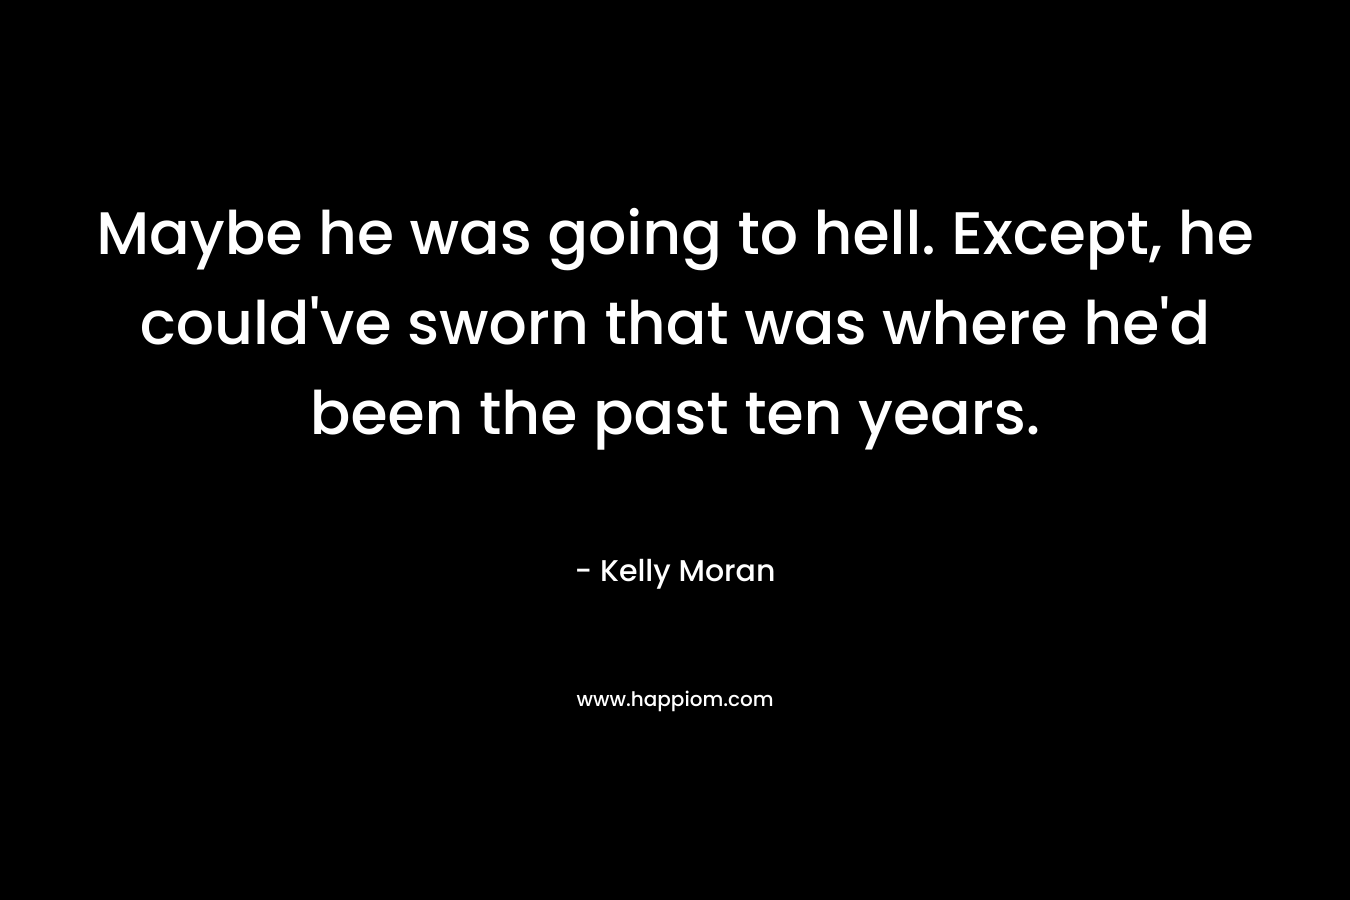 Maybe he was going to hell. Except, he could’ve sworn that was where he’d been the past ten years. – Kelly Moran